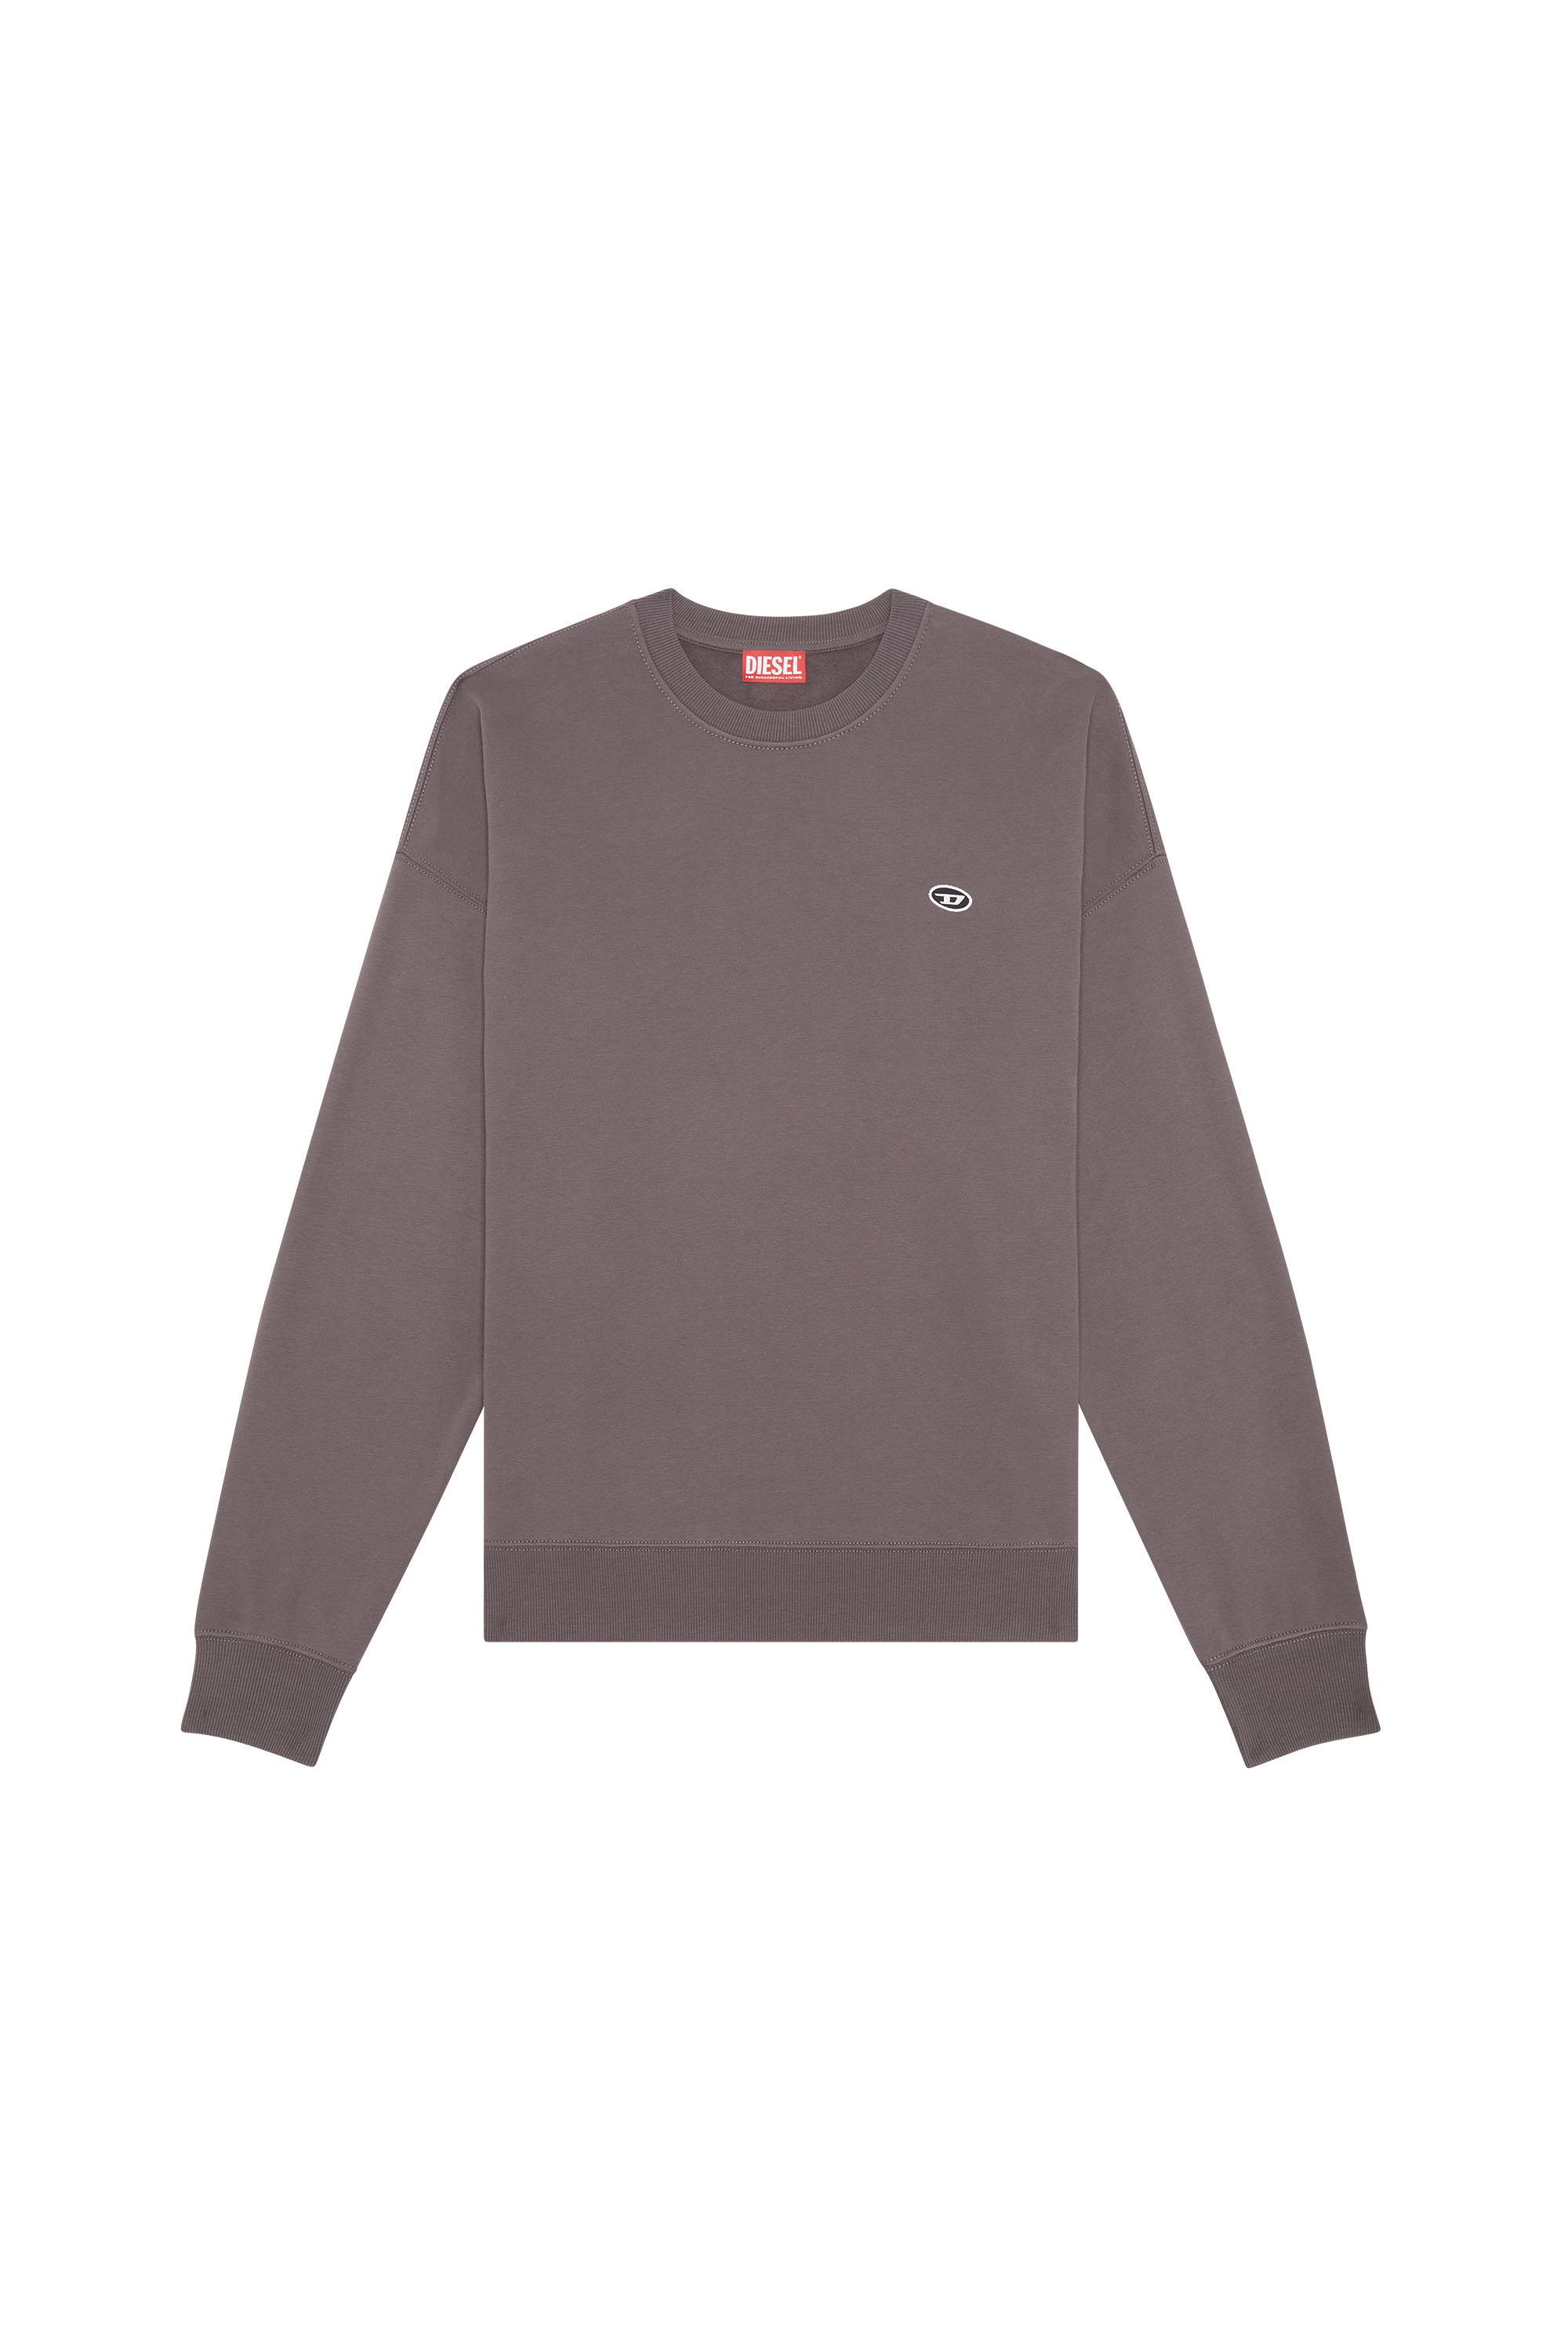 Diesel - S-ROB-DOVAL-PJ, Man Sweatshirt with oval D patch in Grey - Image 3